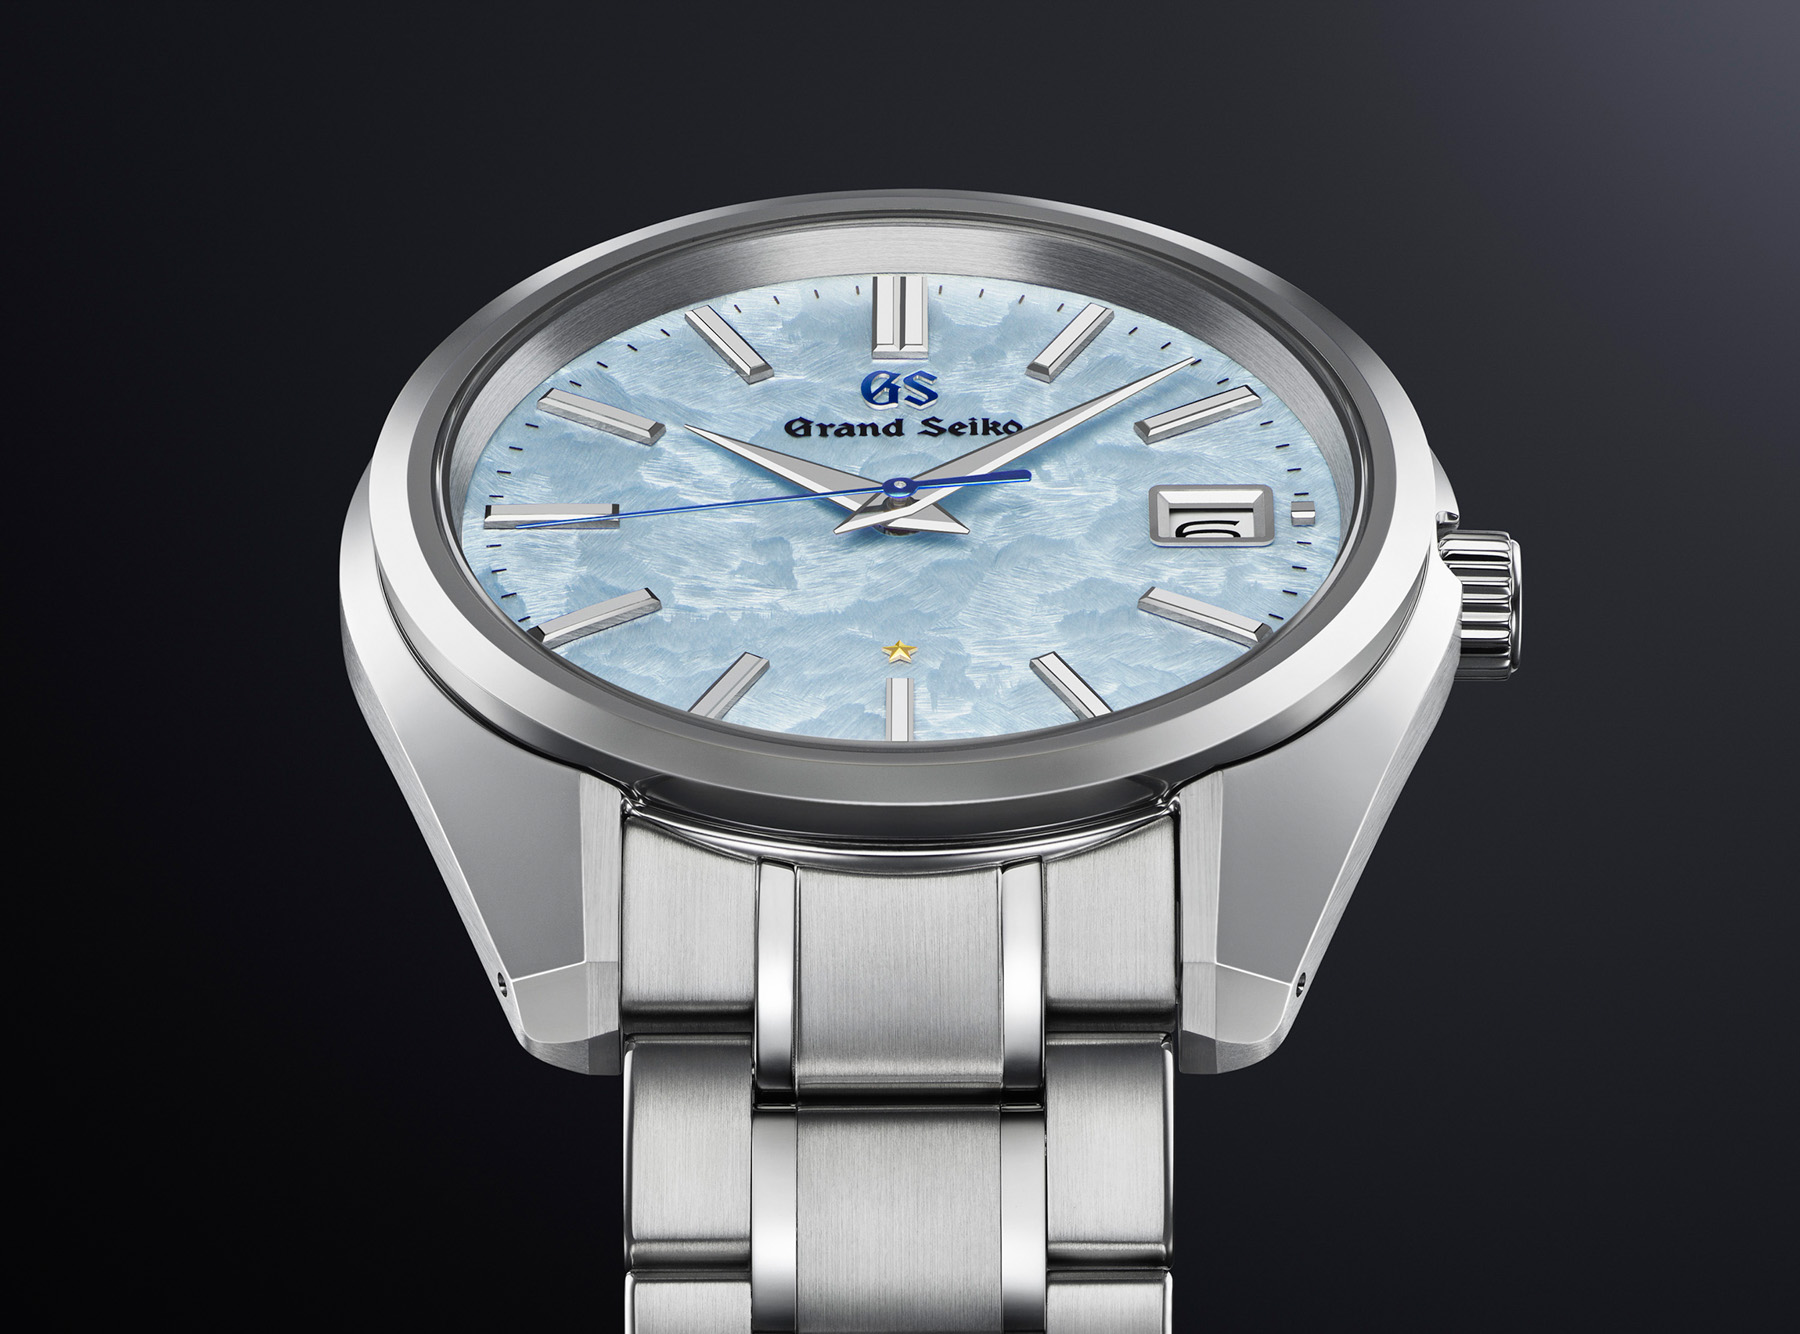 Grand Seiko Introduces The SBGP017 44GS 55th Anniversary Limited Edition  Watch